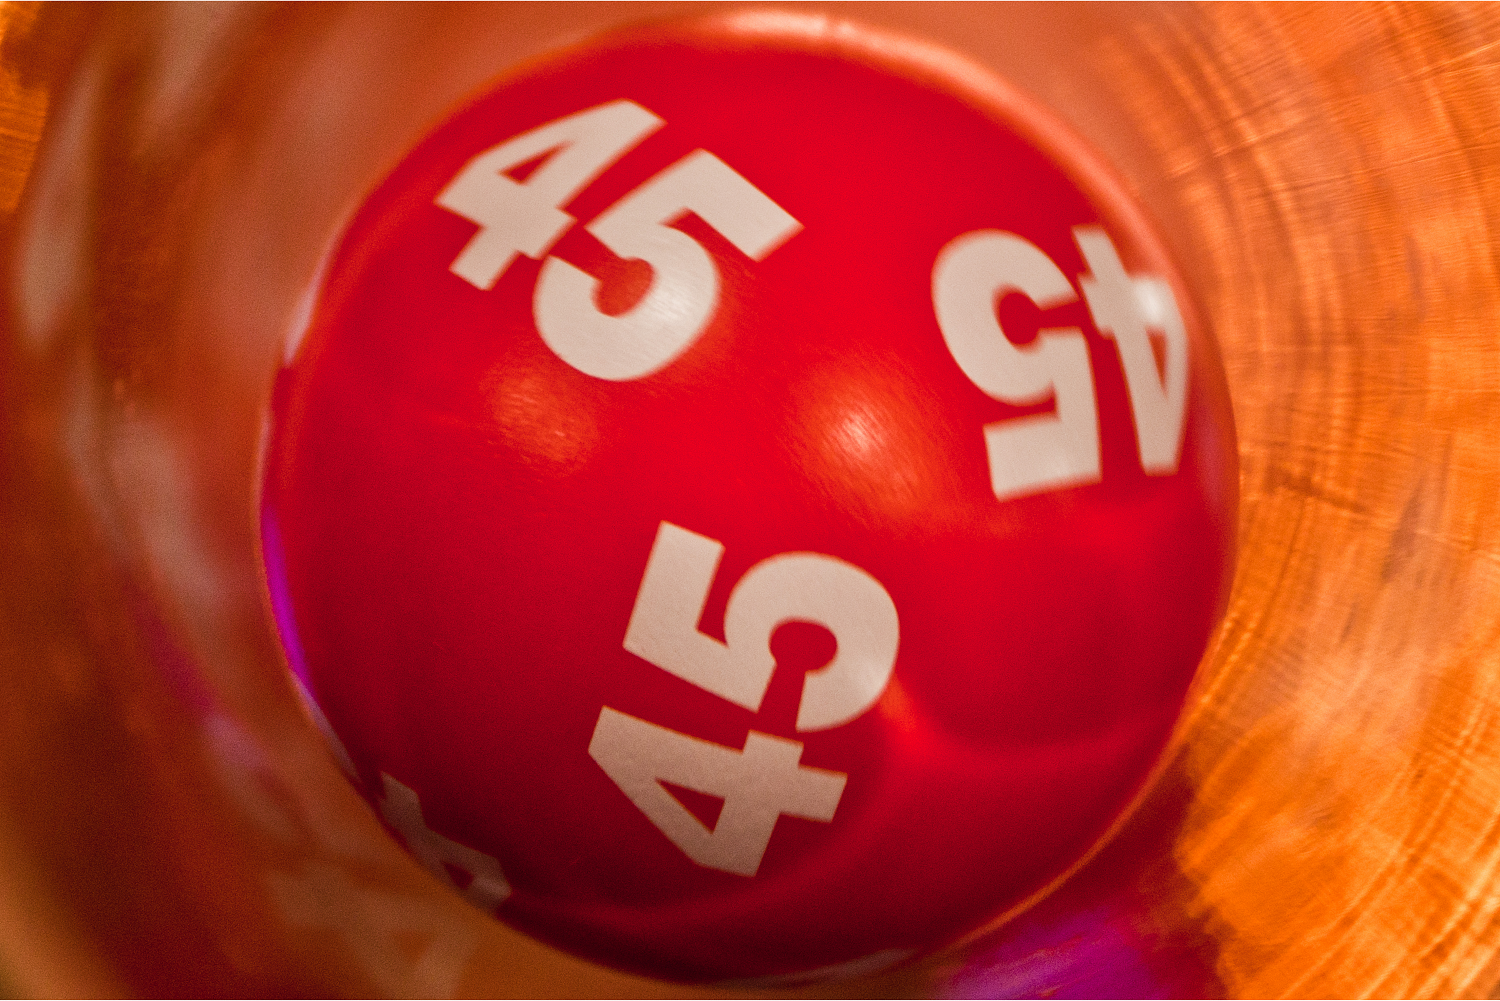 Red lottery ball with the number 45, representing charity lottery providers